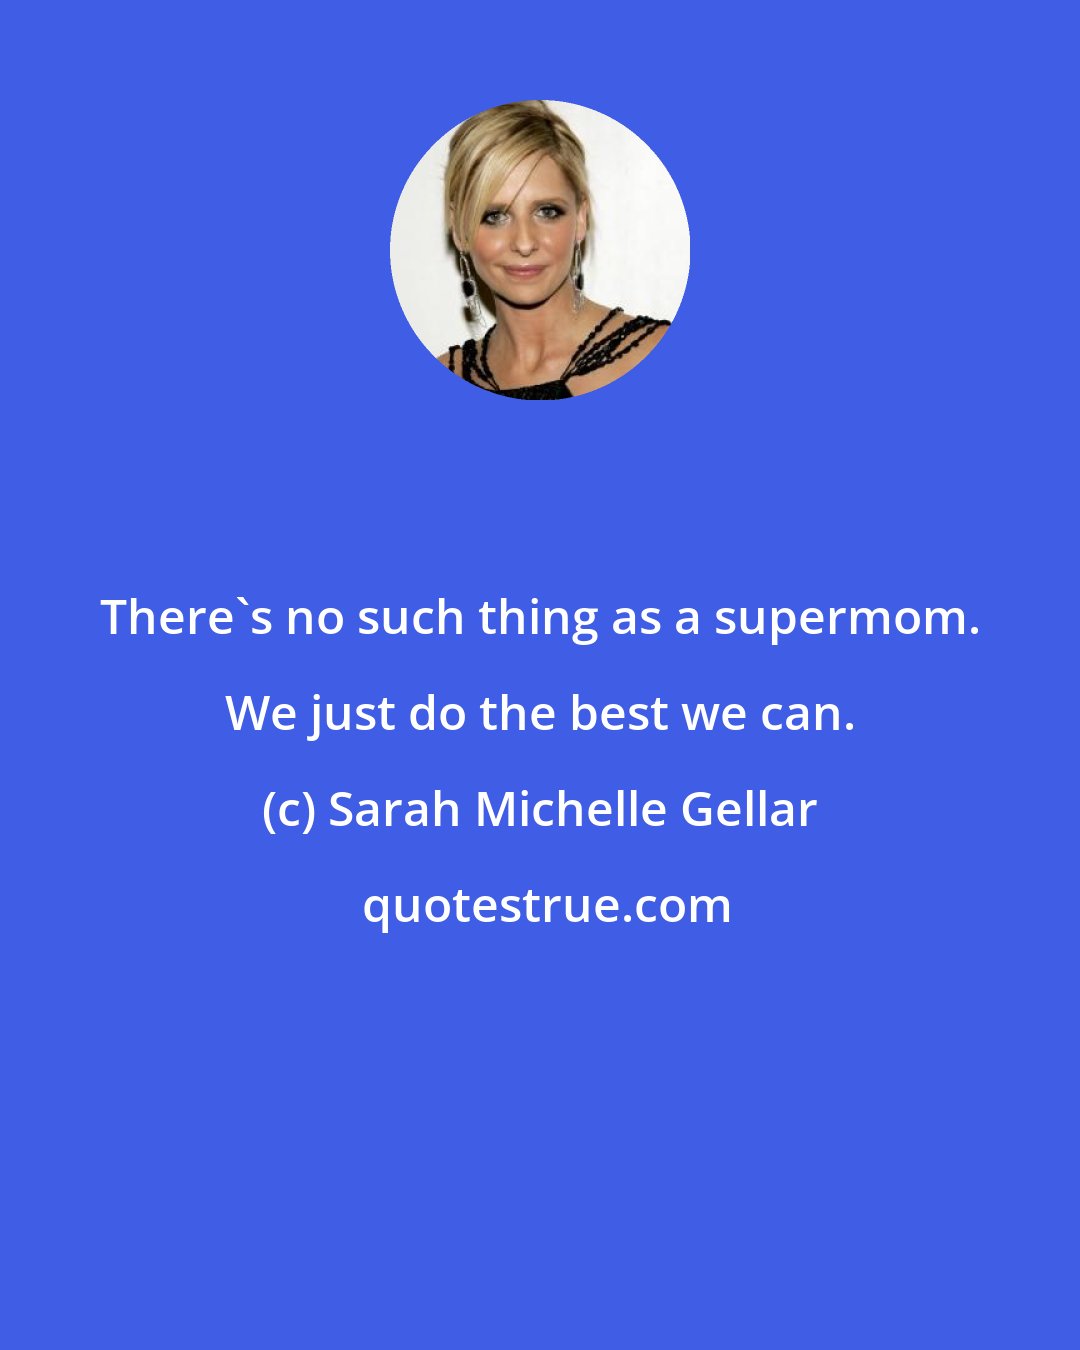 Sarah Michelle Gellar: There's no such thing as a supermom. We just do the best we can.